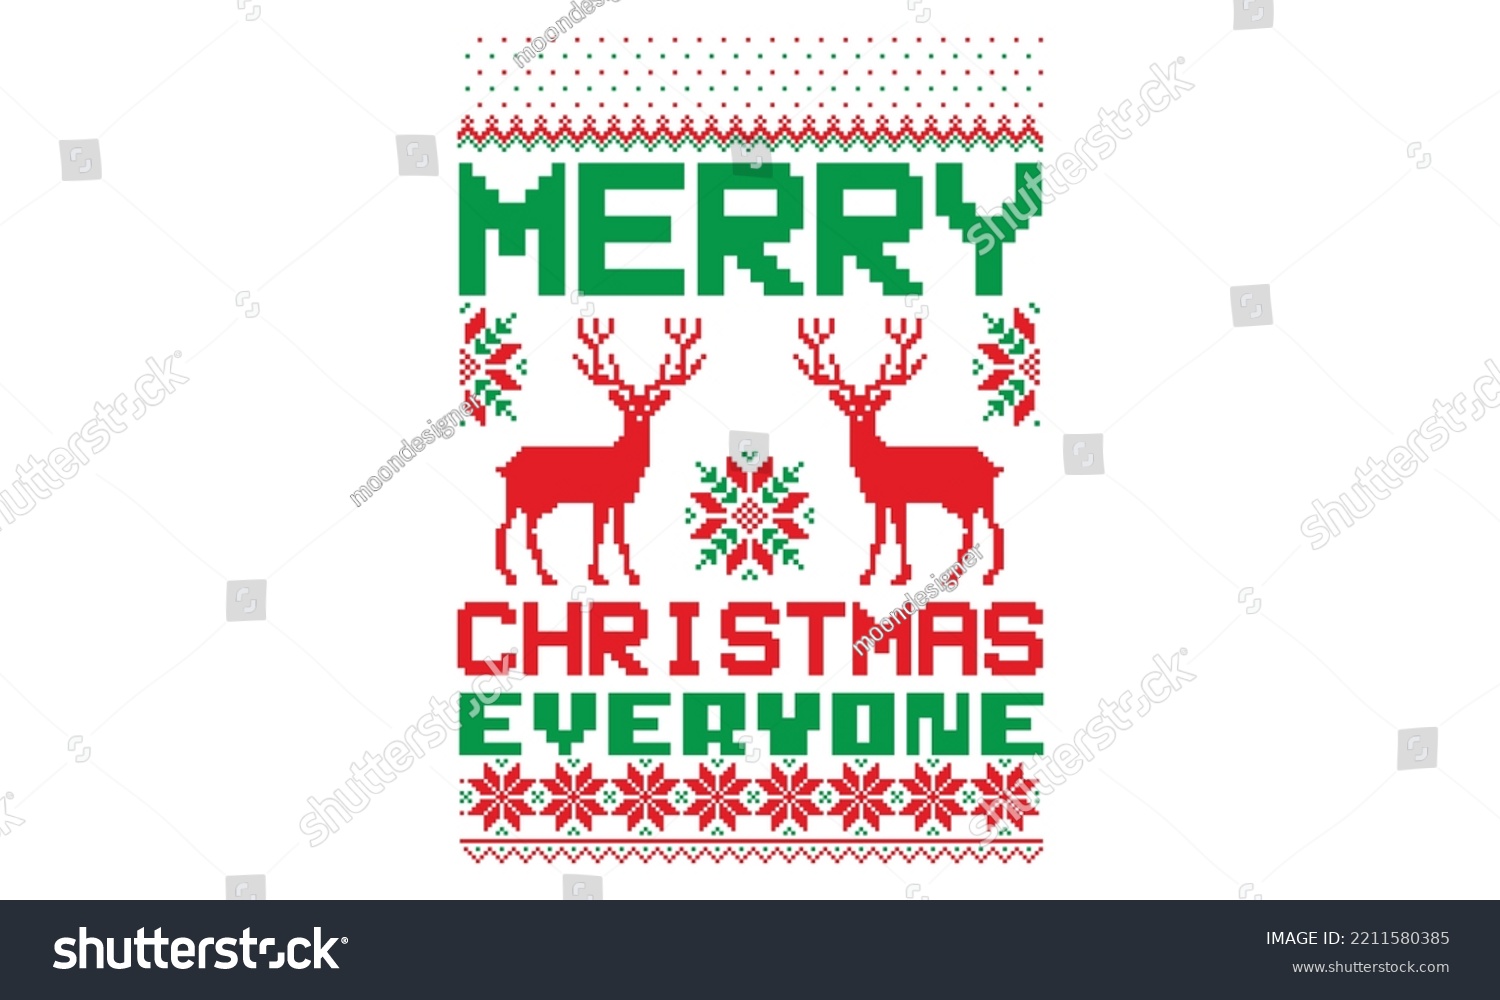 SVG of Merry Christmas everyone - UGLY Christmas Sweater t Shirt designs and SVG,  Holiday designs, Santa, Stock vector background, curtains, posters, bed covers, pillows EPS 10 svg